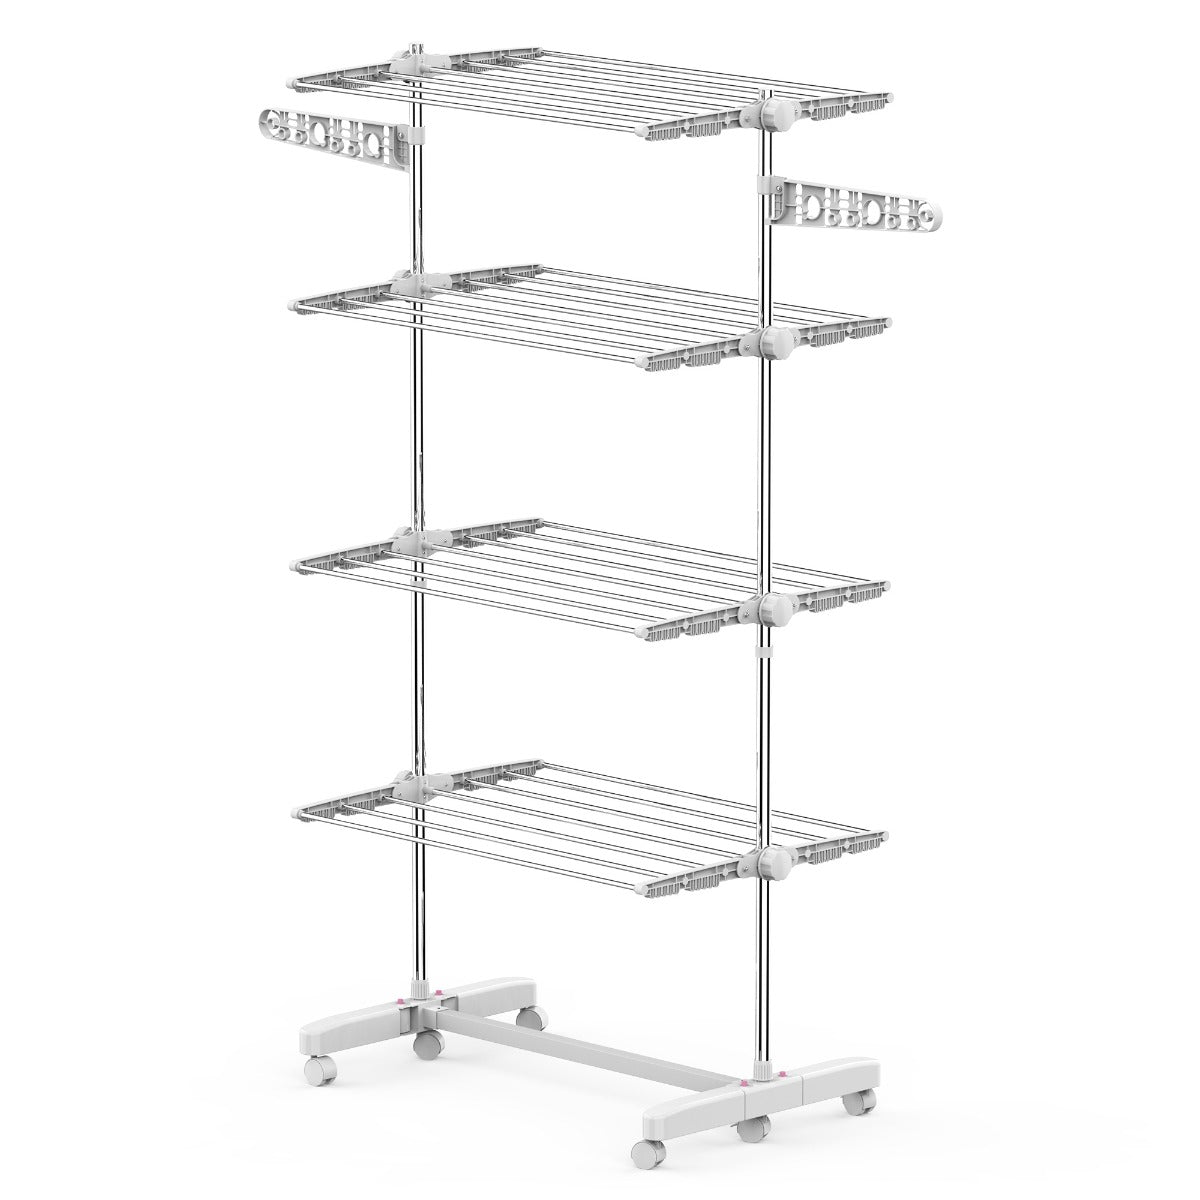 HOMCOM 4 Layers Folding Cloth Hanger Stand-White/Silver